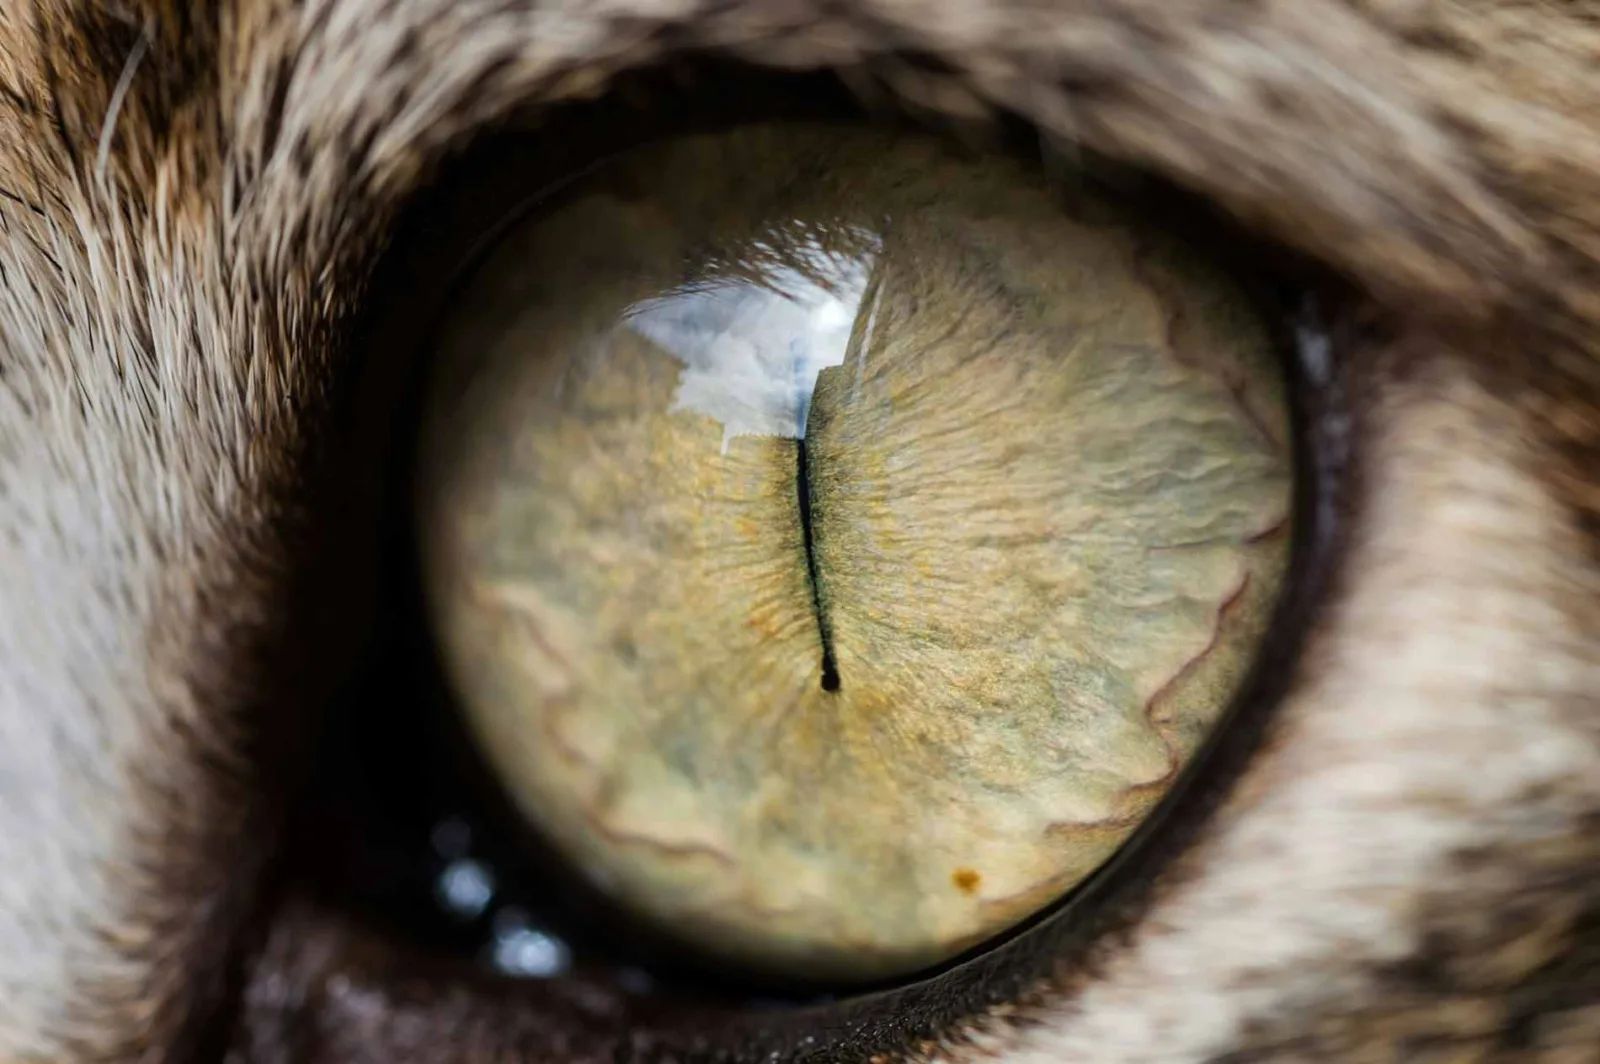 A close-up photo of a cat's eye, showing intricate details of the iris. The iris has a mix of yellow, brown, and green hues with a vertical, slit-shaped pupil. The eye reflects light, showcasing a detailed texture.